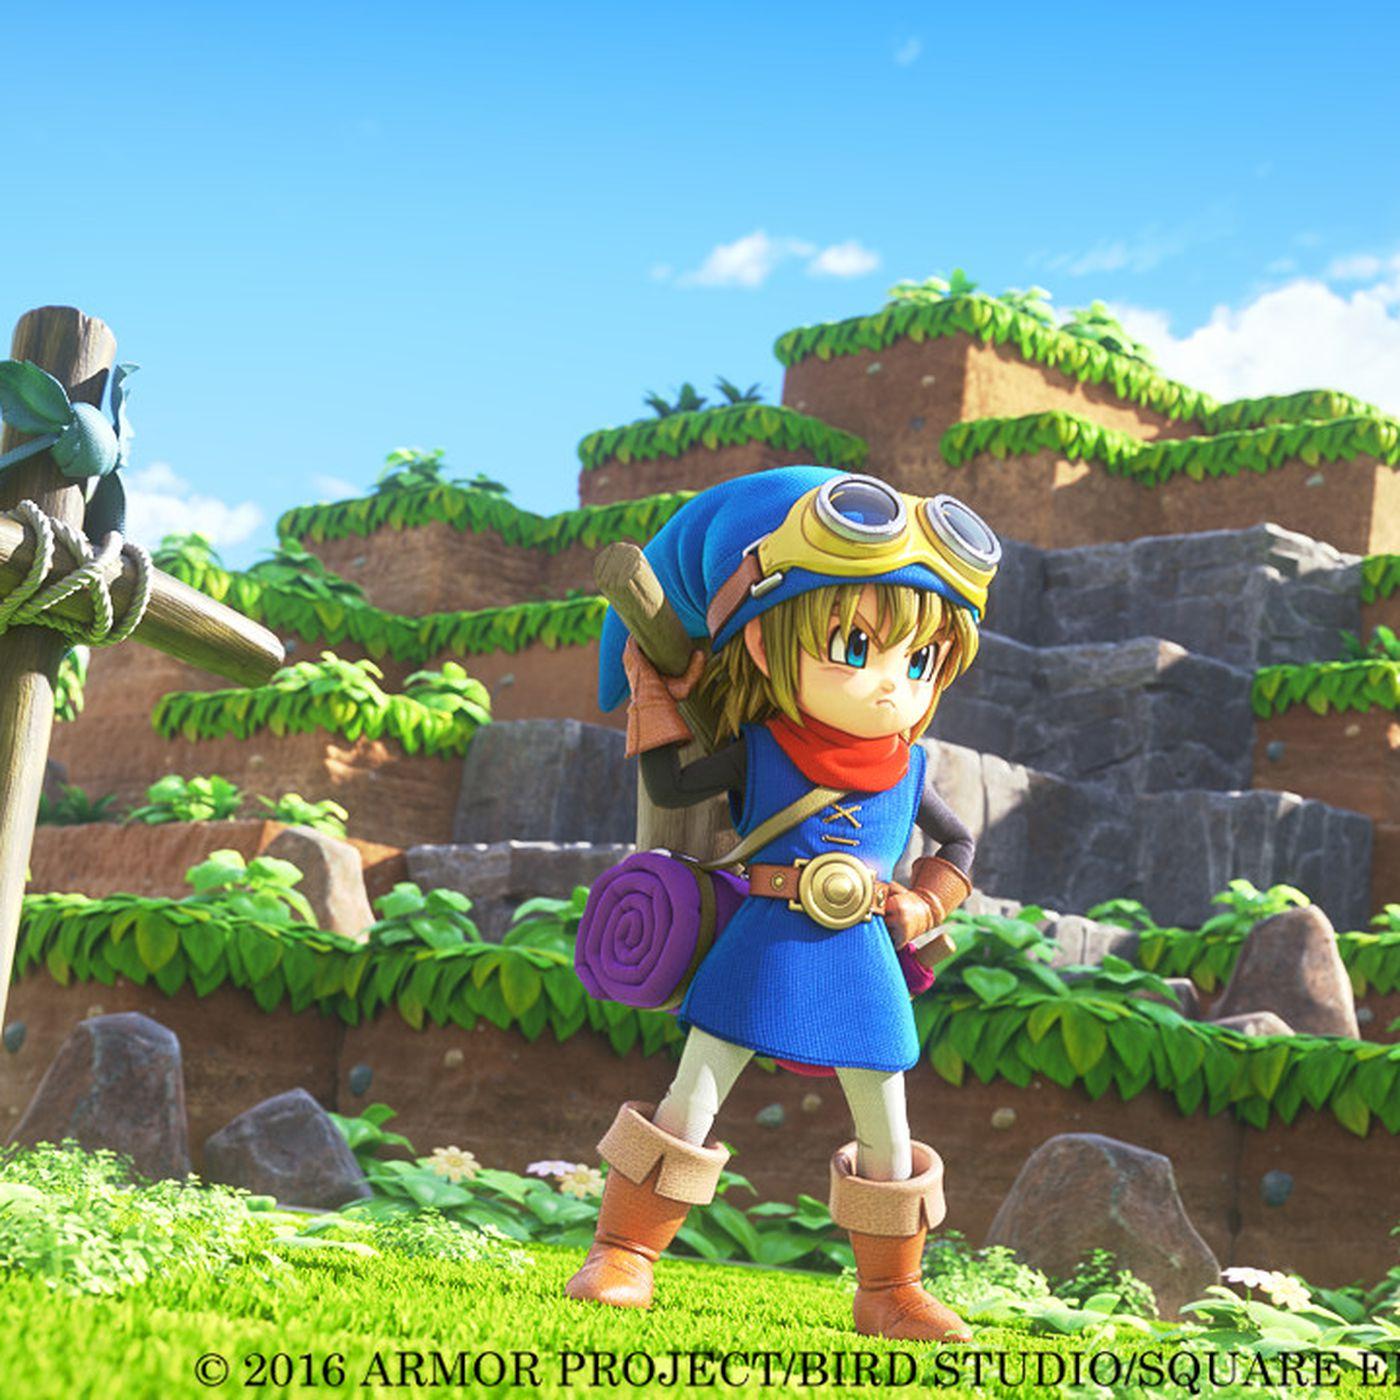 Minecraft Like Dragon Quest Builders Is Launching In October